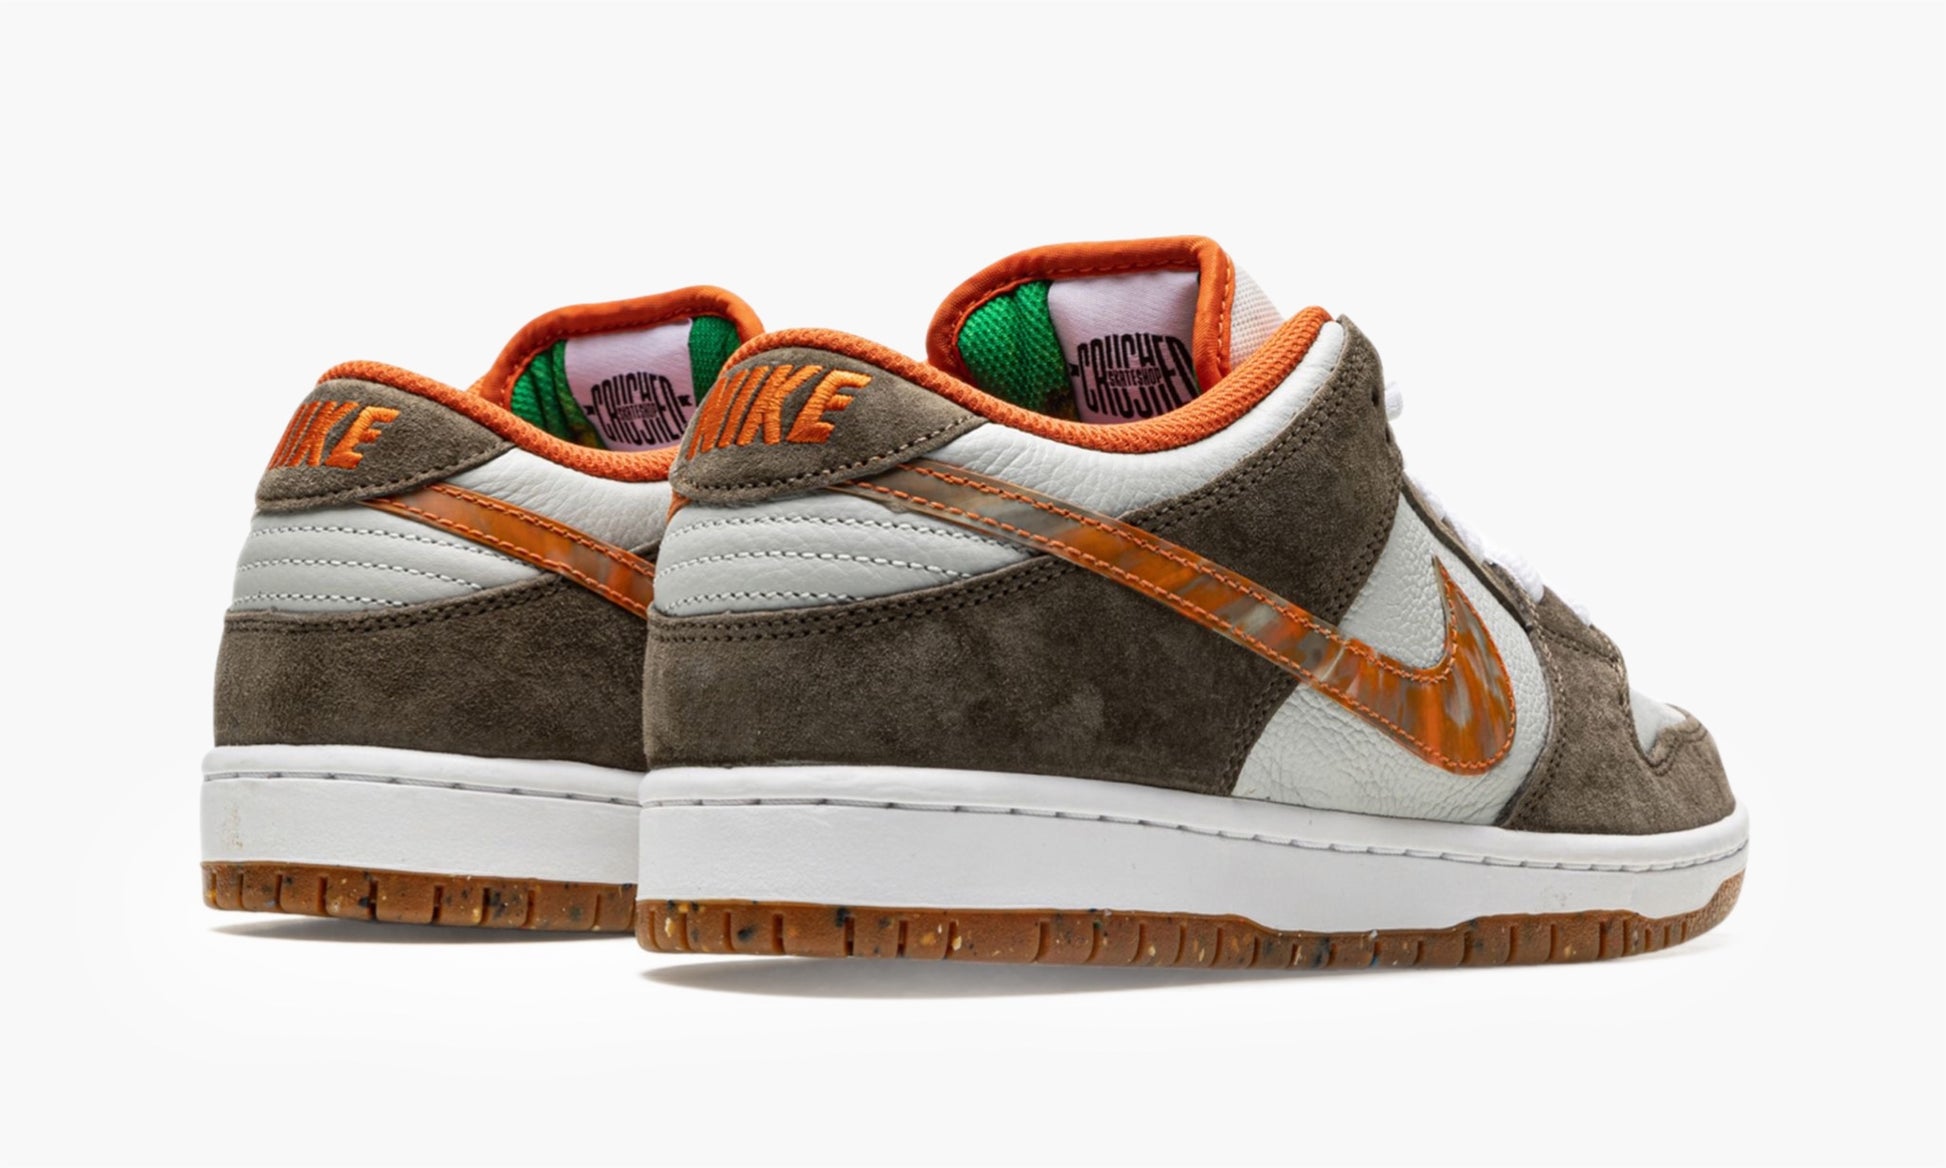 SB Dunk Low Crushed D.C. - DH7782 001 | The Sortage